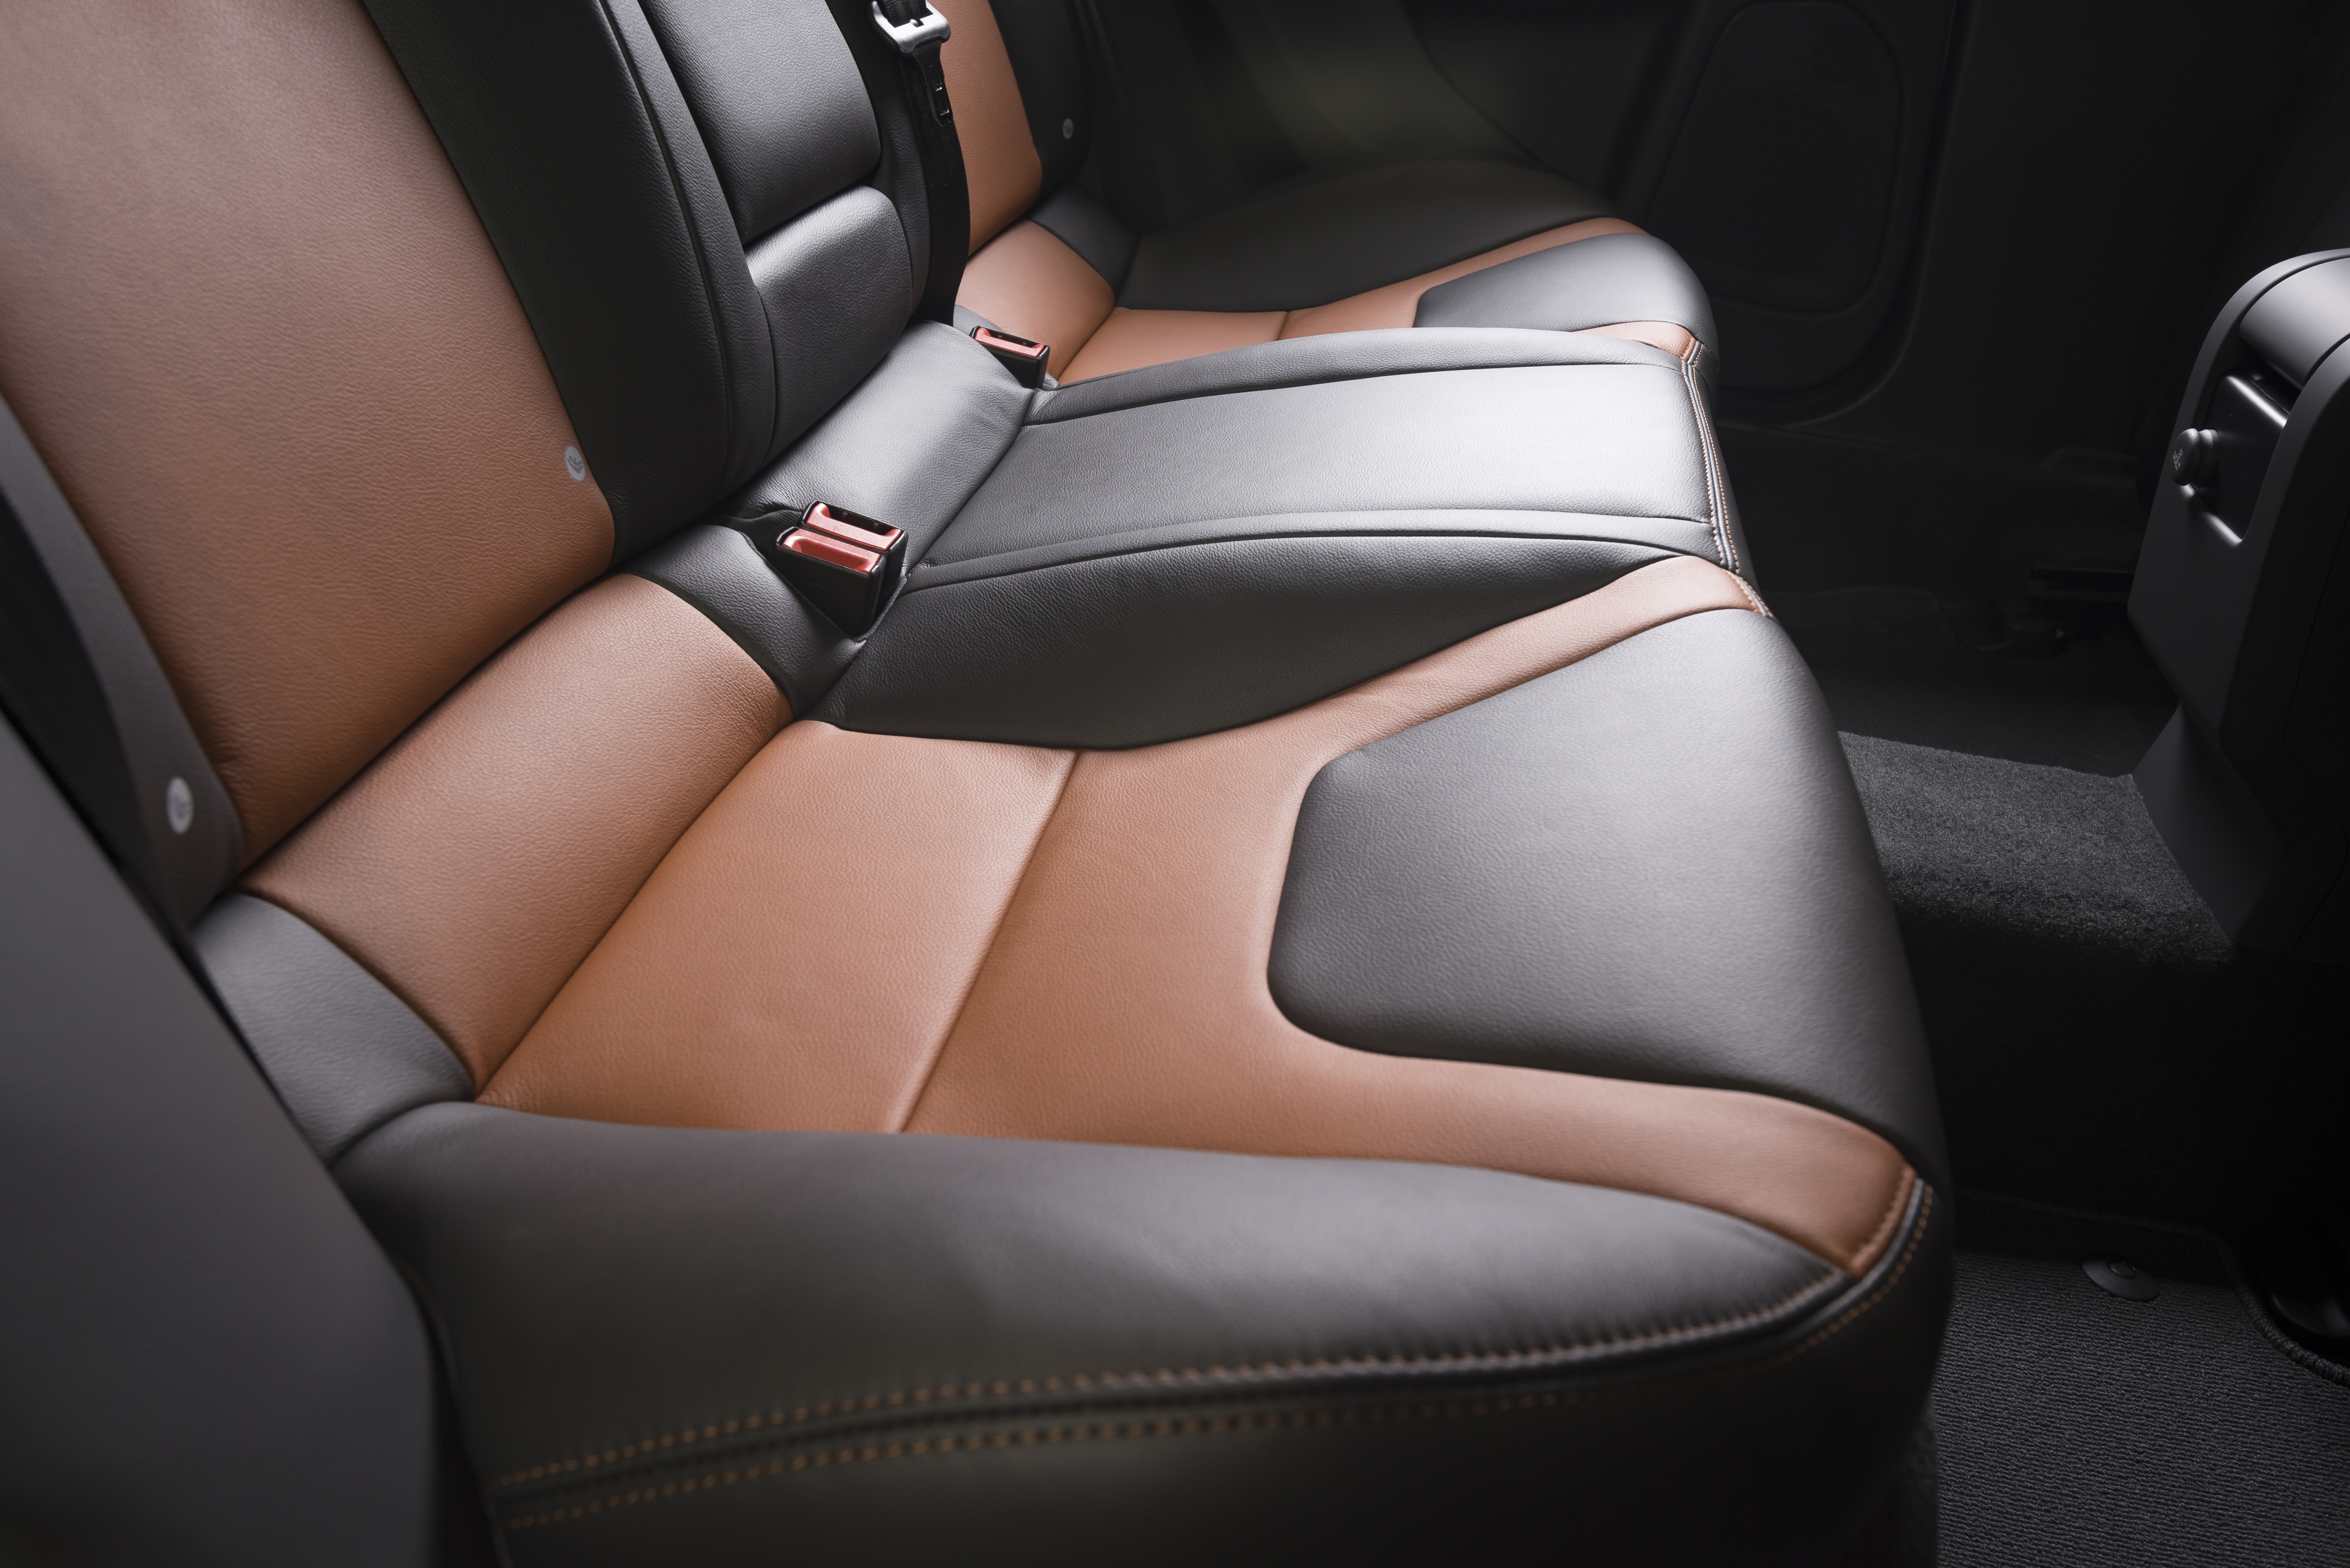 Which vehicles have the most legroom?